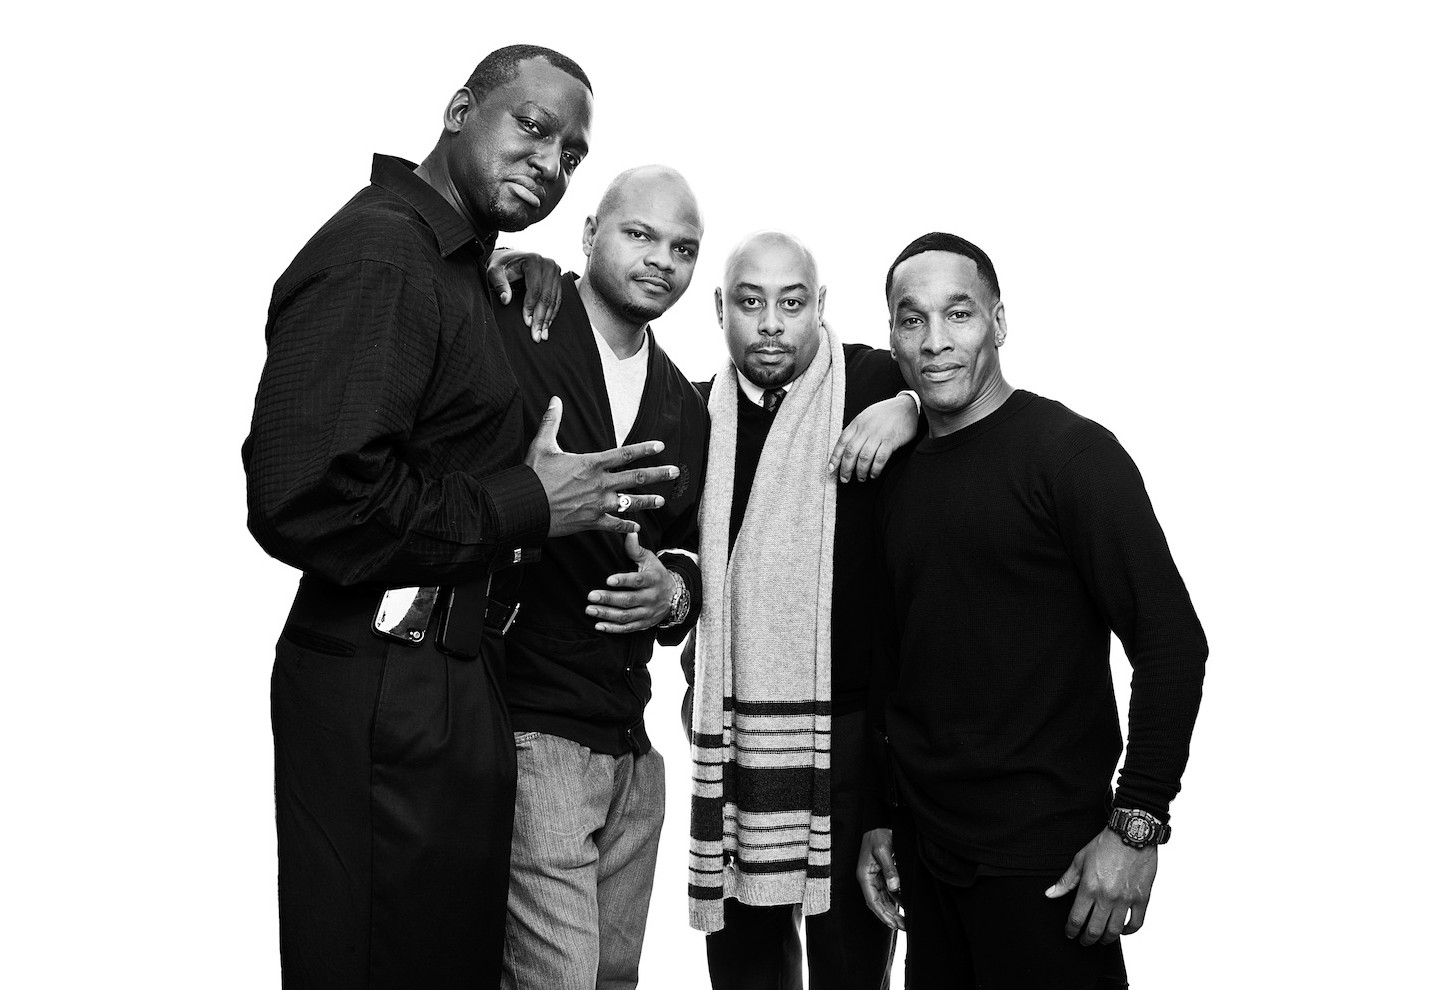 Four of the Central Park 5, Yusef Salaam, Kevin Richardson, Raymond Santana, Korey Wise during an interview with TIME in 2013. (Jonathan D. Woods for TIME)